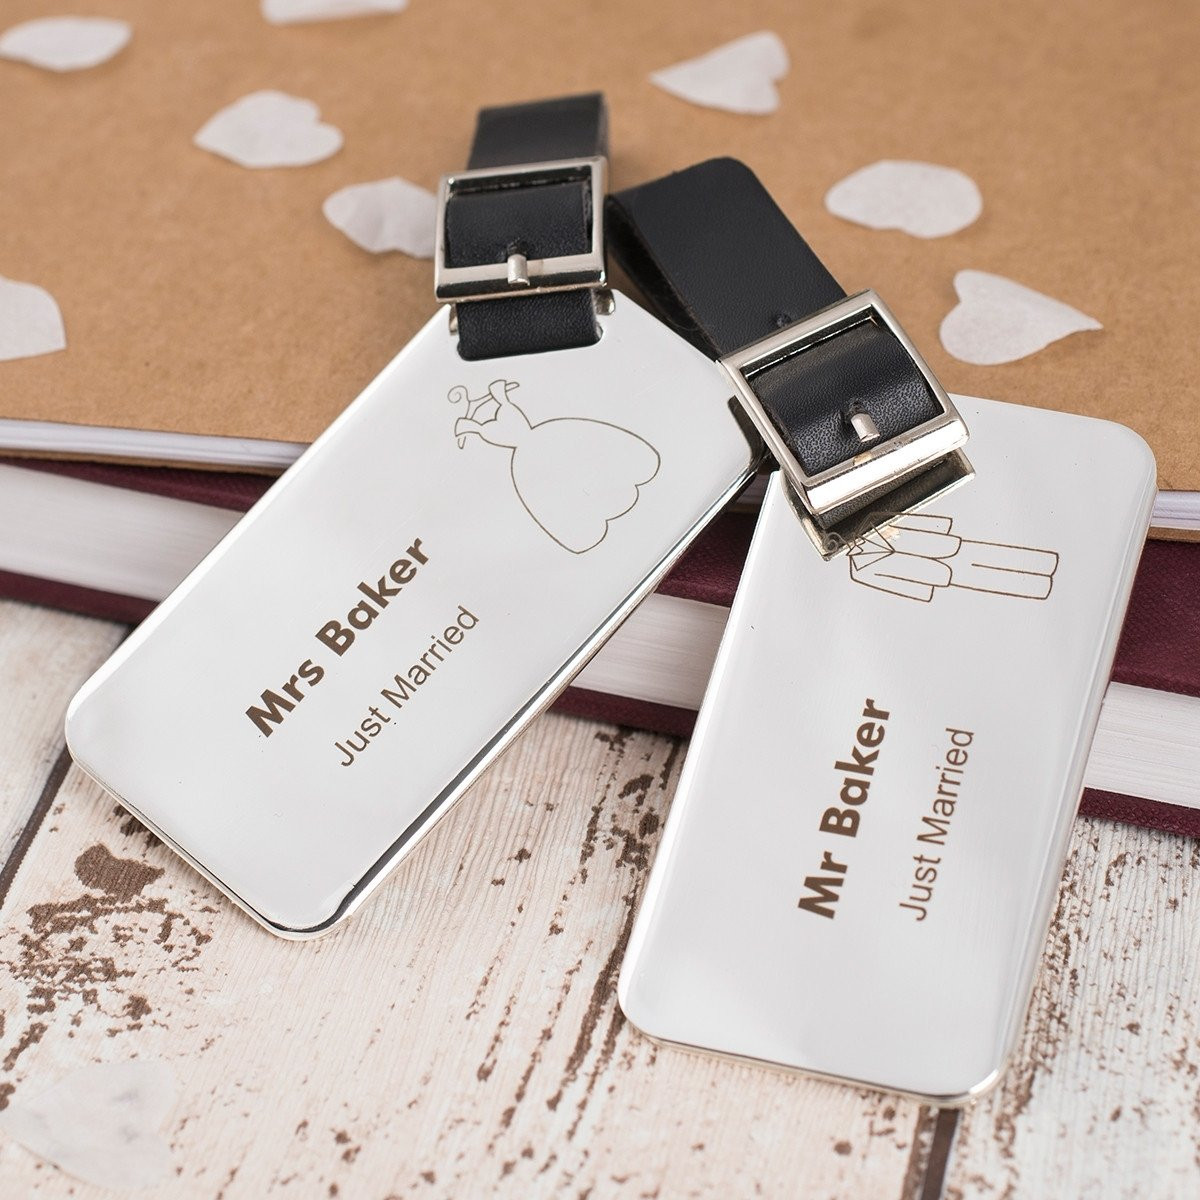 Wedding Gift Ideas Couple
 10 Trendy Gift Ideas For Couples Who Have Everything 2020